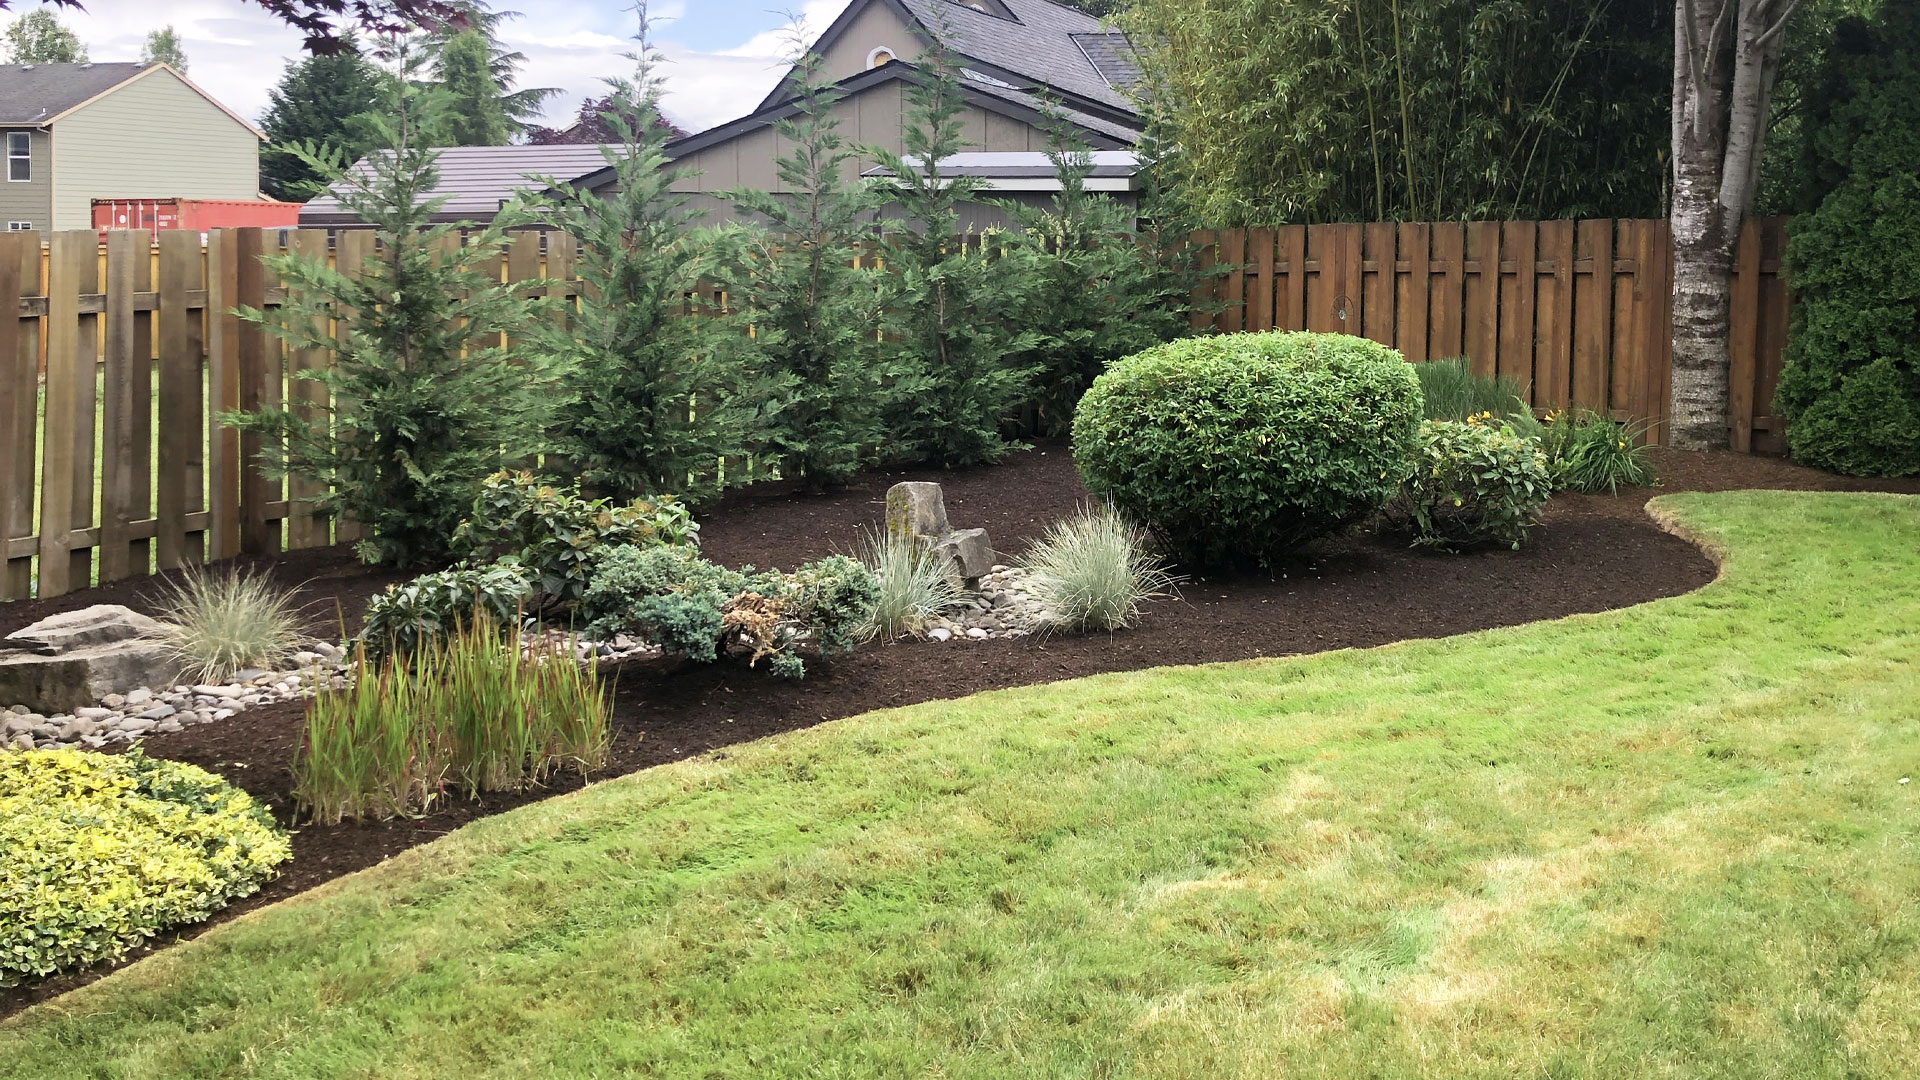 New landscaping installed at a home in Happy Valley, OR.